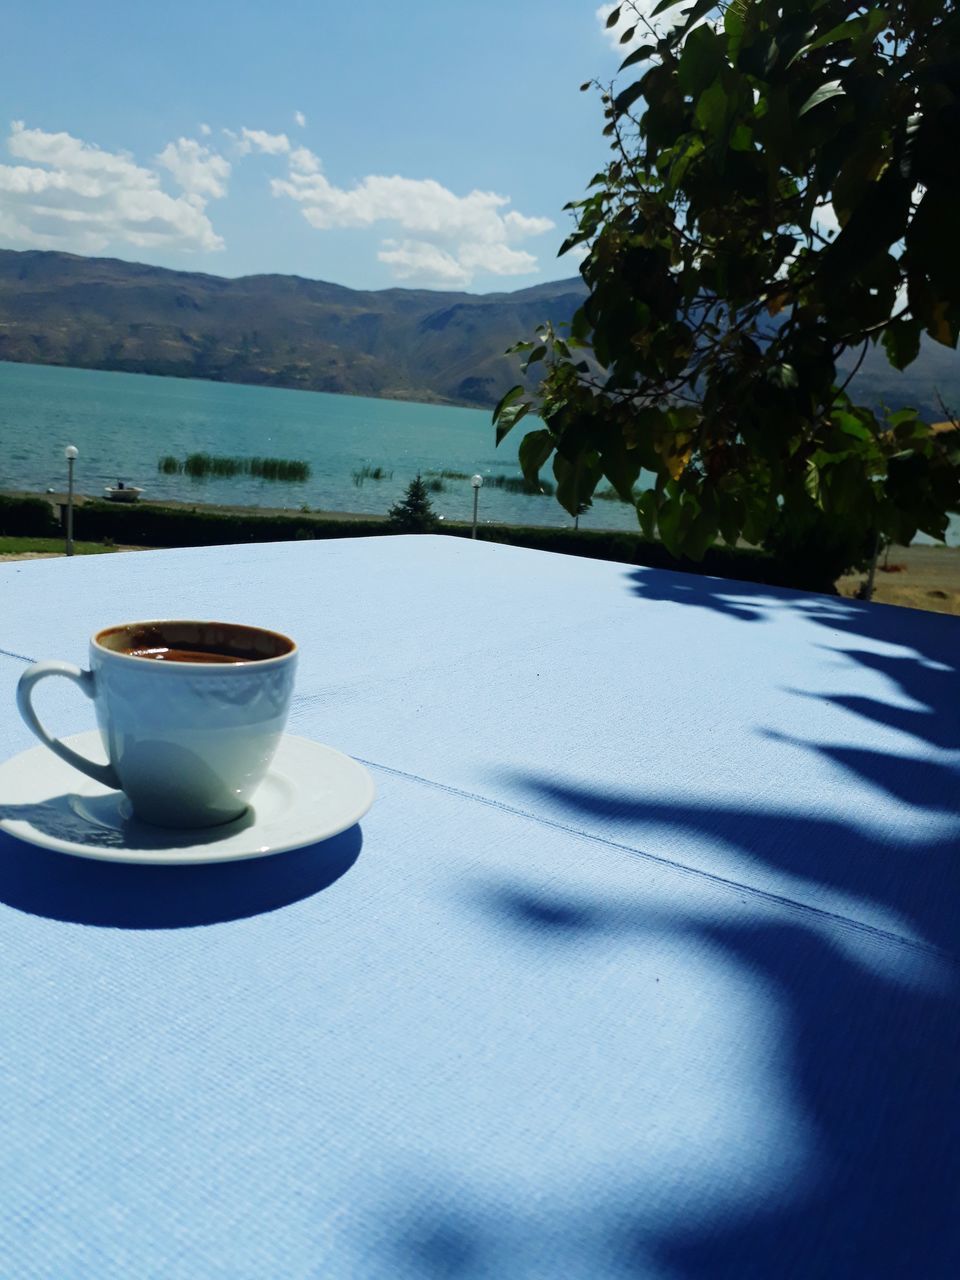 COFFEE CUP ON TABLE AGAINST MOUNTAIN